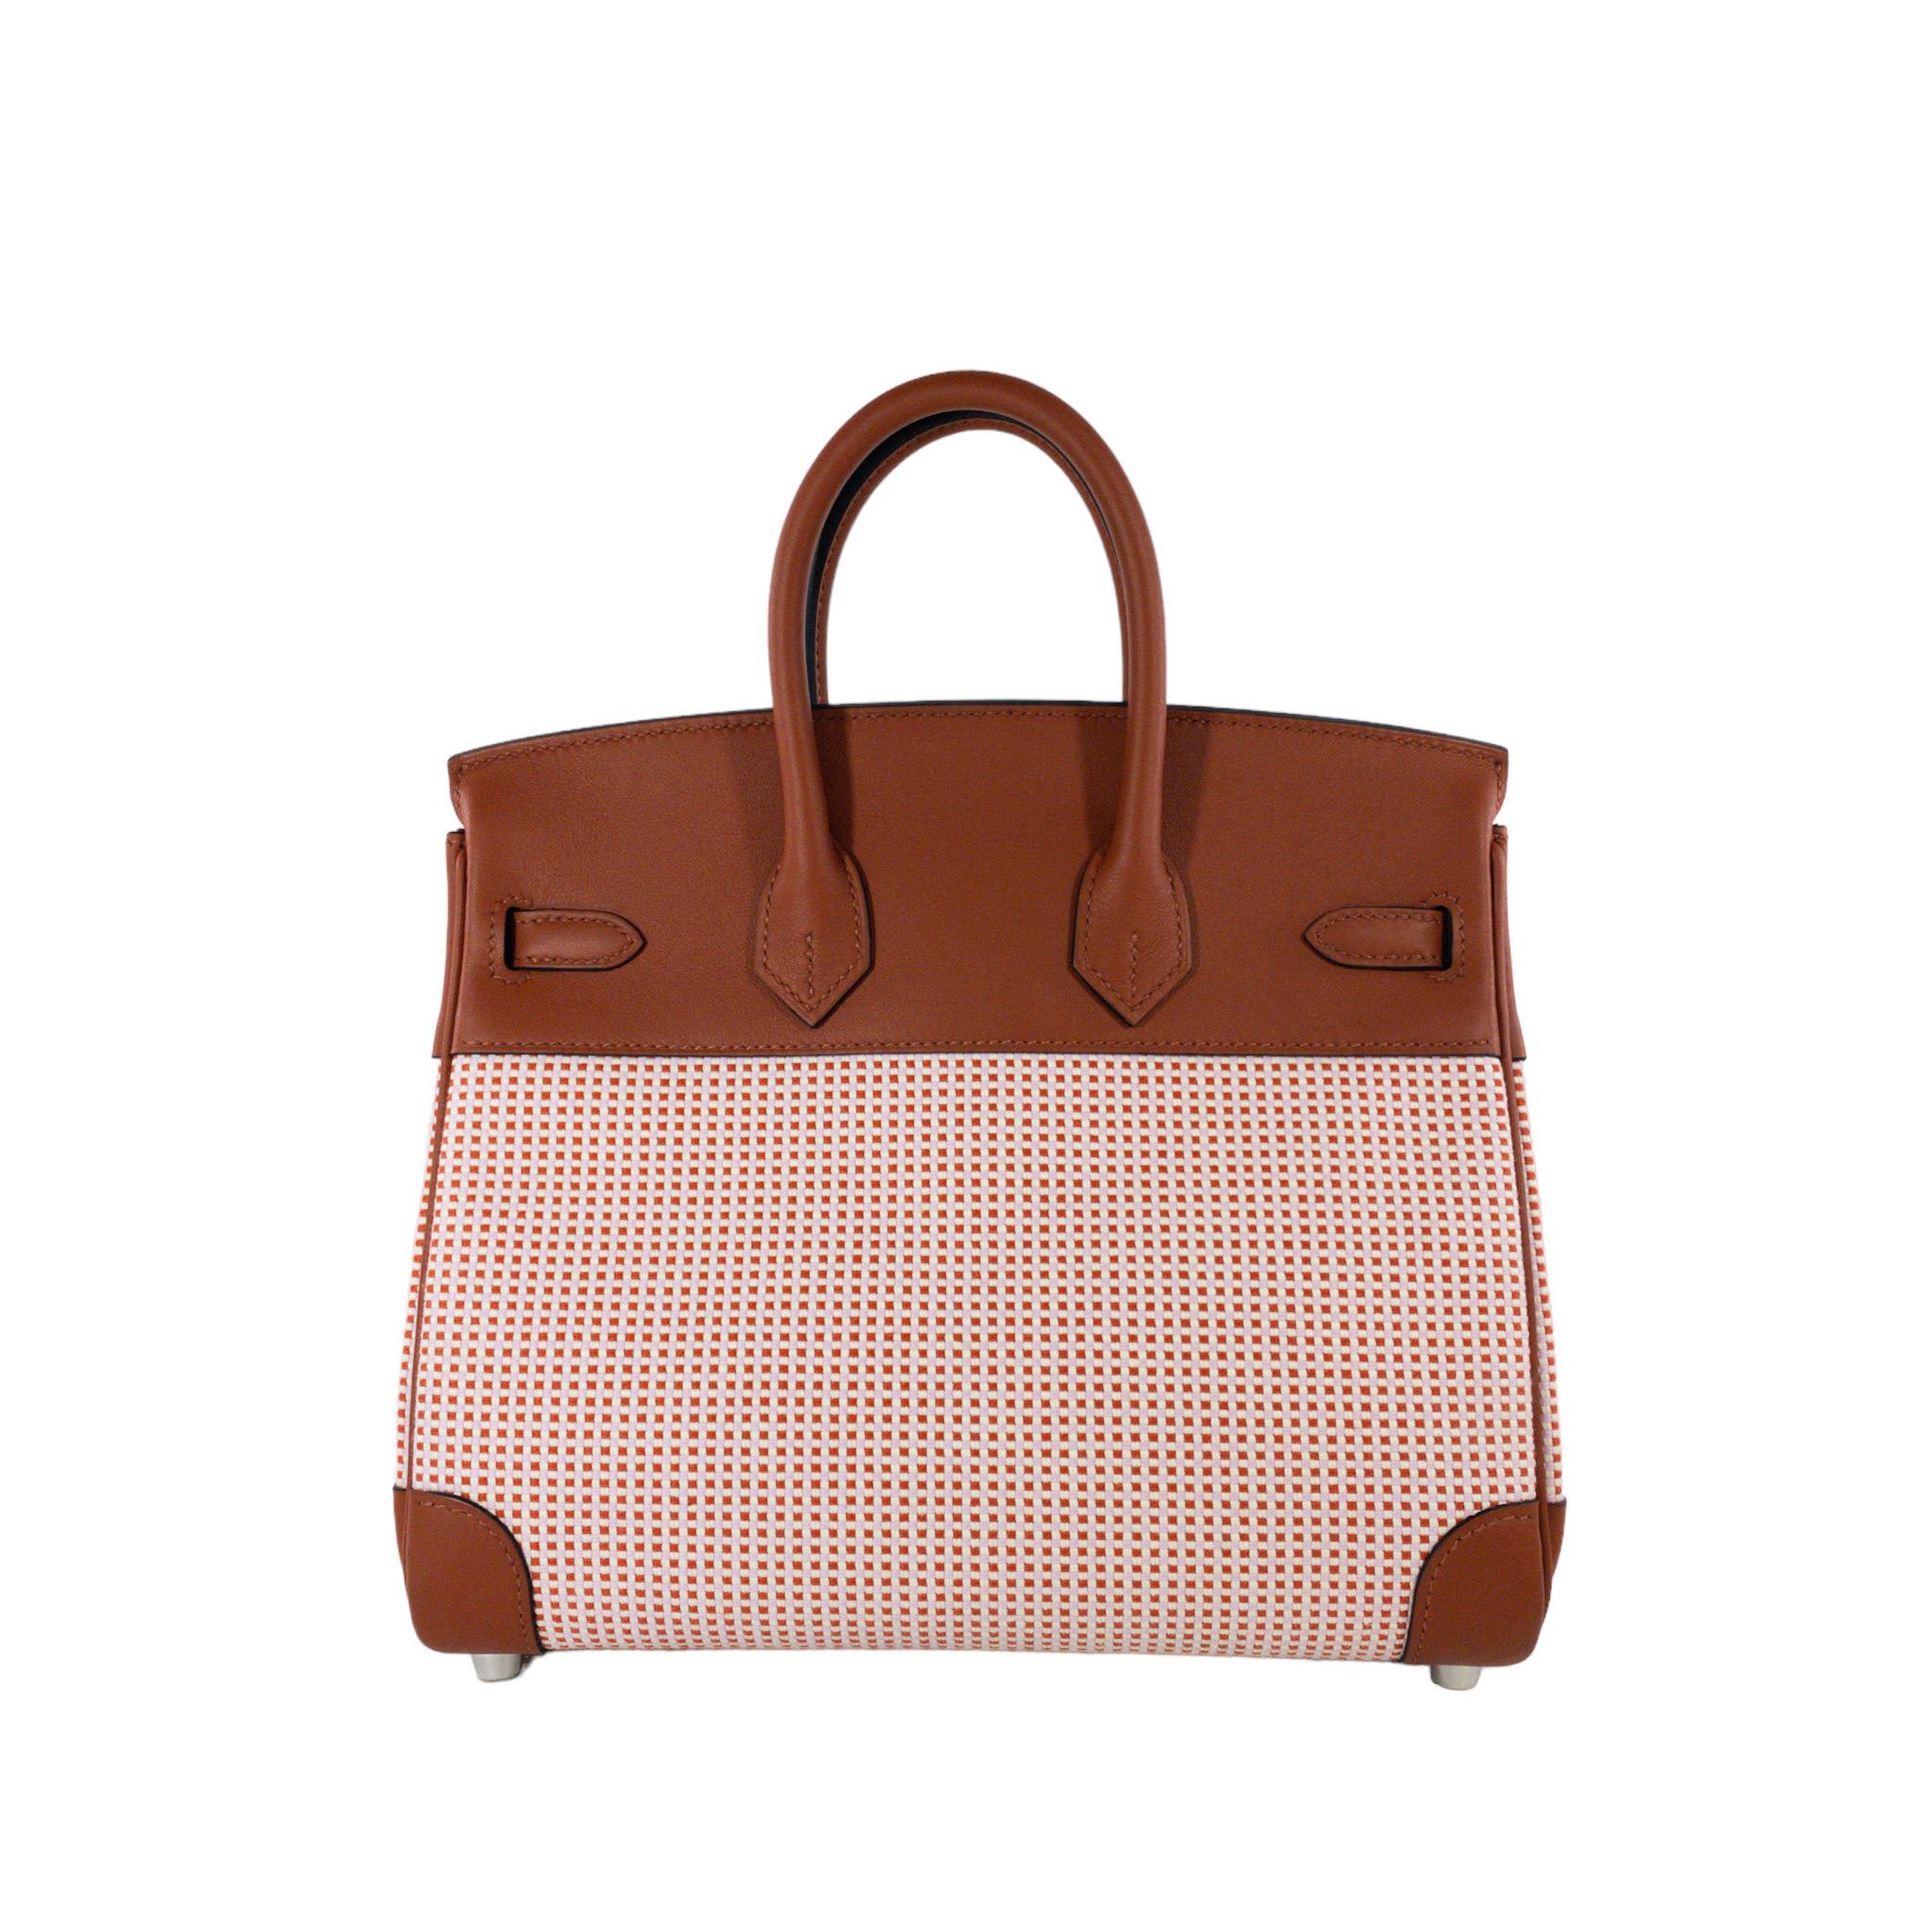 Consign of the Times presents this Brand new in box authentic Hermes Birkin 25cm limited edition Quadrille style with Palladium hardware. Quadrille woven toile with the Swift leather trim. Swift leather is Cuivre and quadrille weave is Ecru, Brique